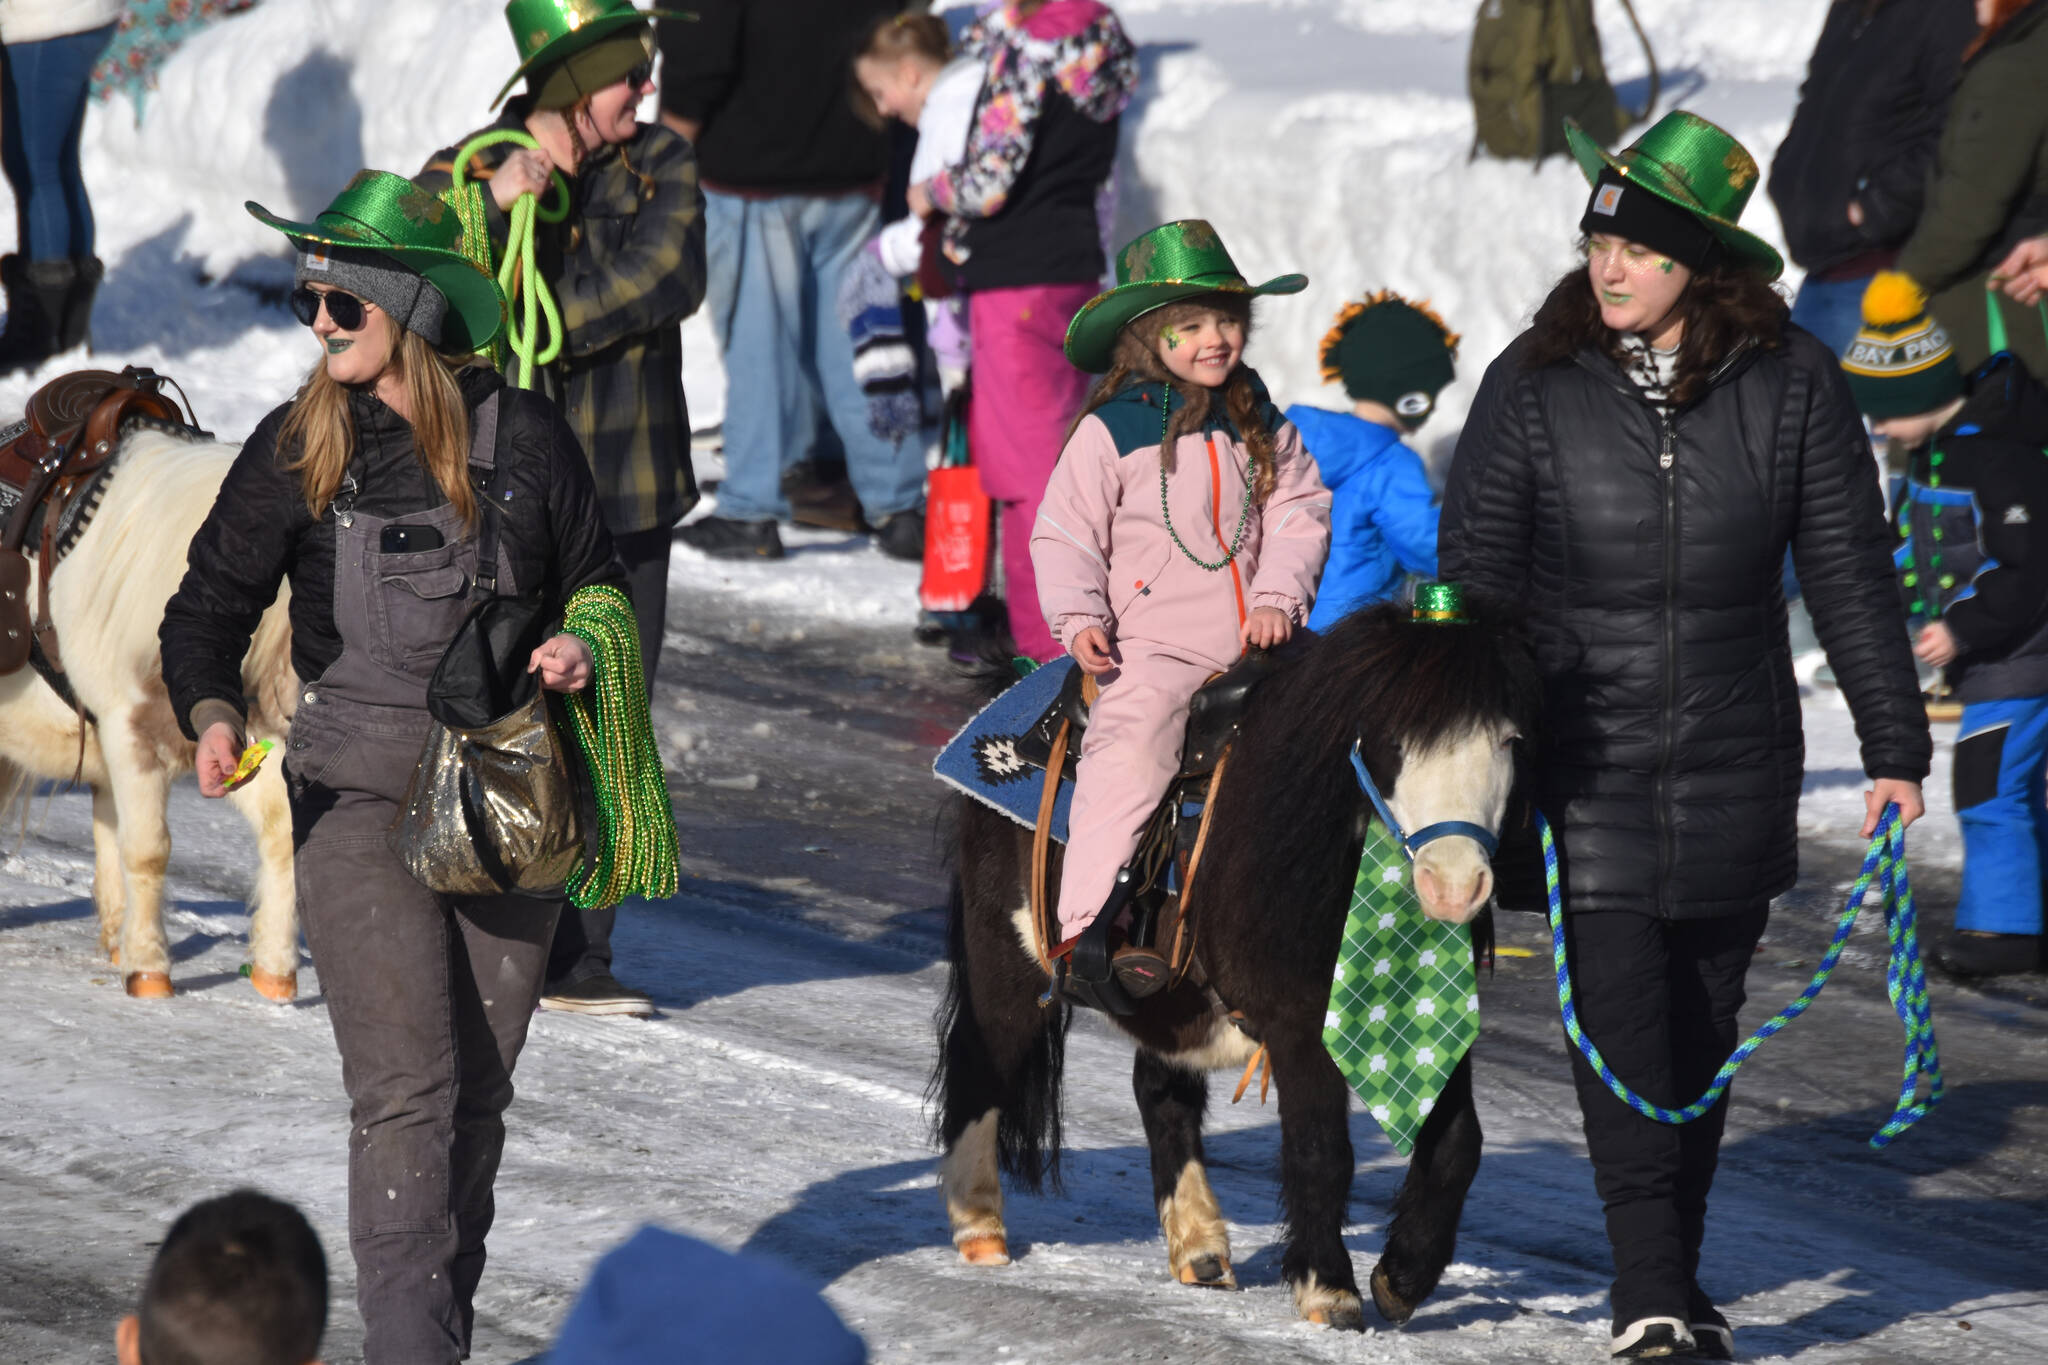 A child rides a pony as the 32nd annual Sweeney’s St. Patrick’s Day Parade proceeds down Fireweed Street in Soldotna, Alaska on Friday, March 17, 2023. (Jake Dye/Peninsula Clarion)